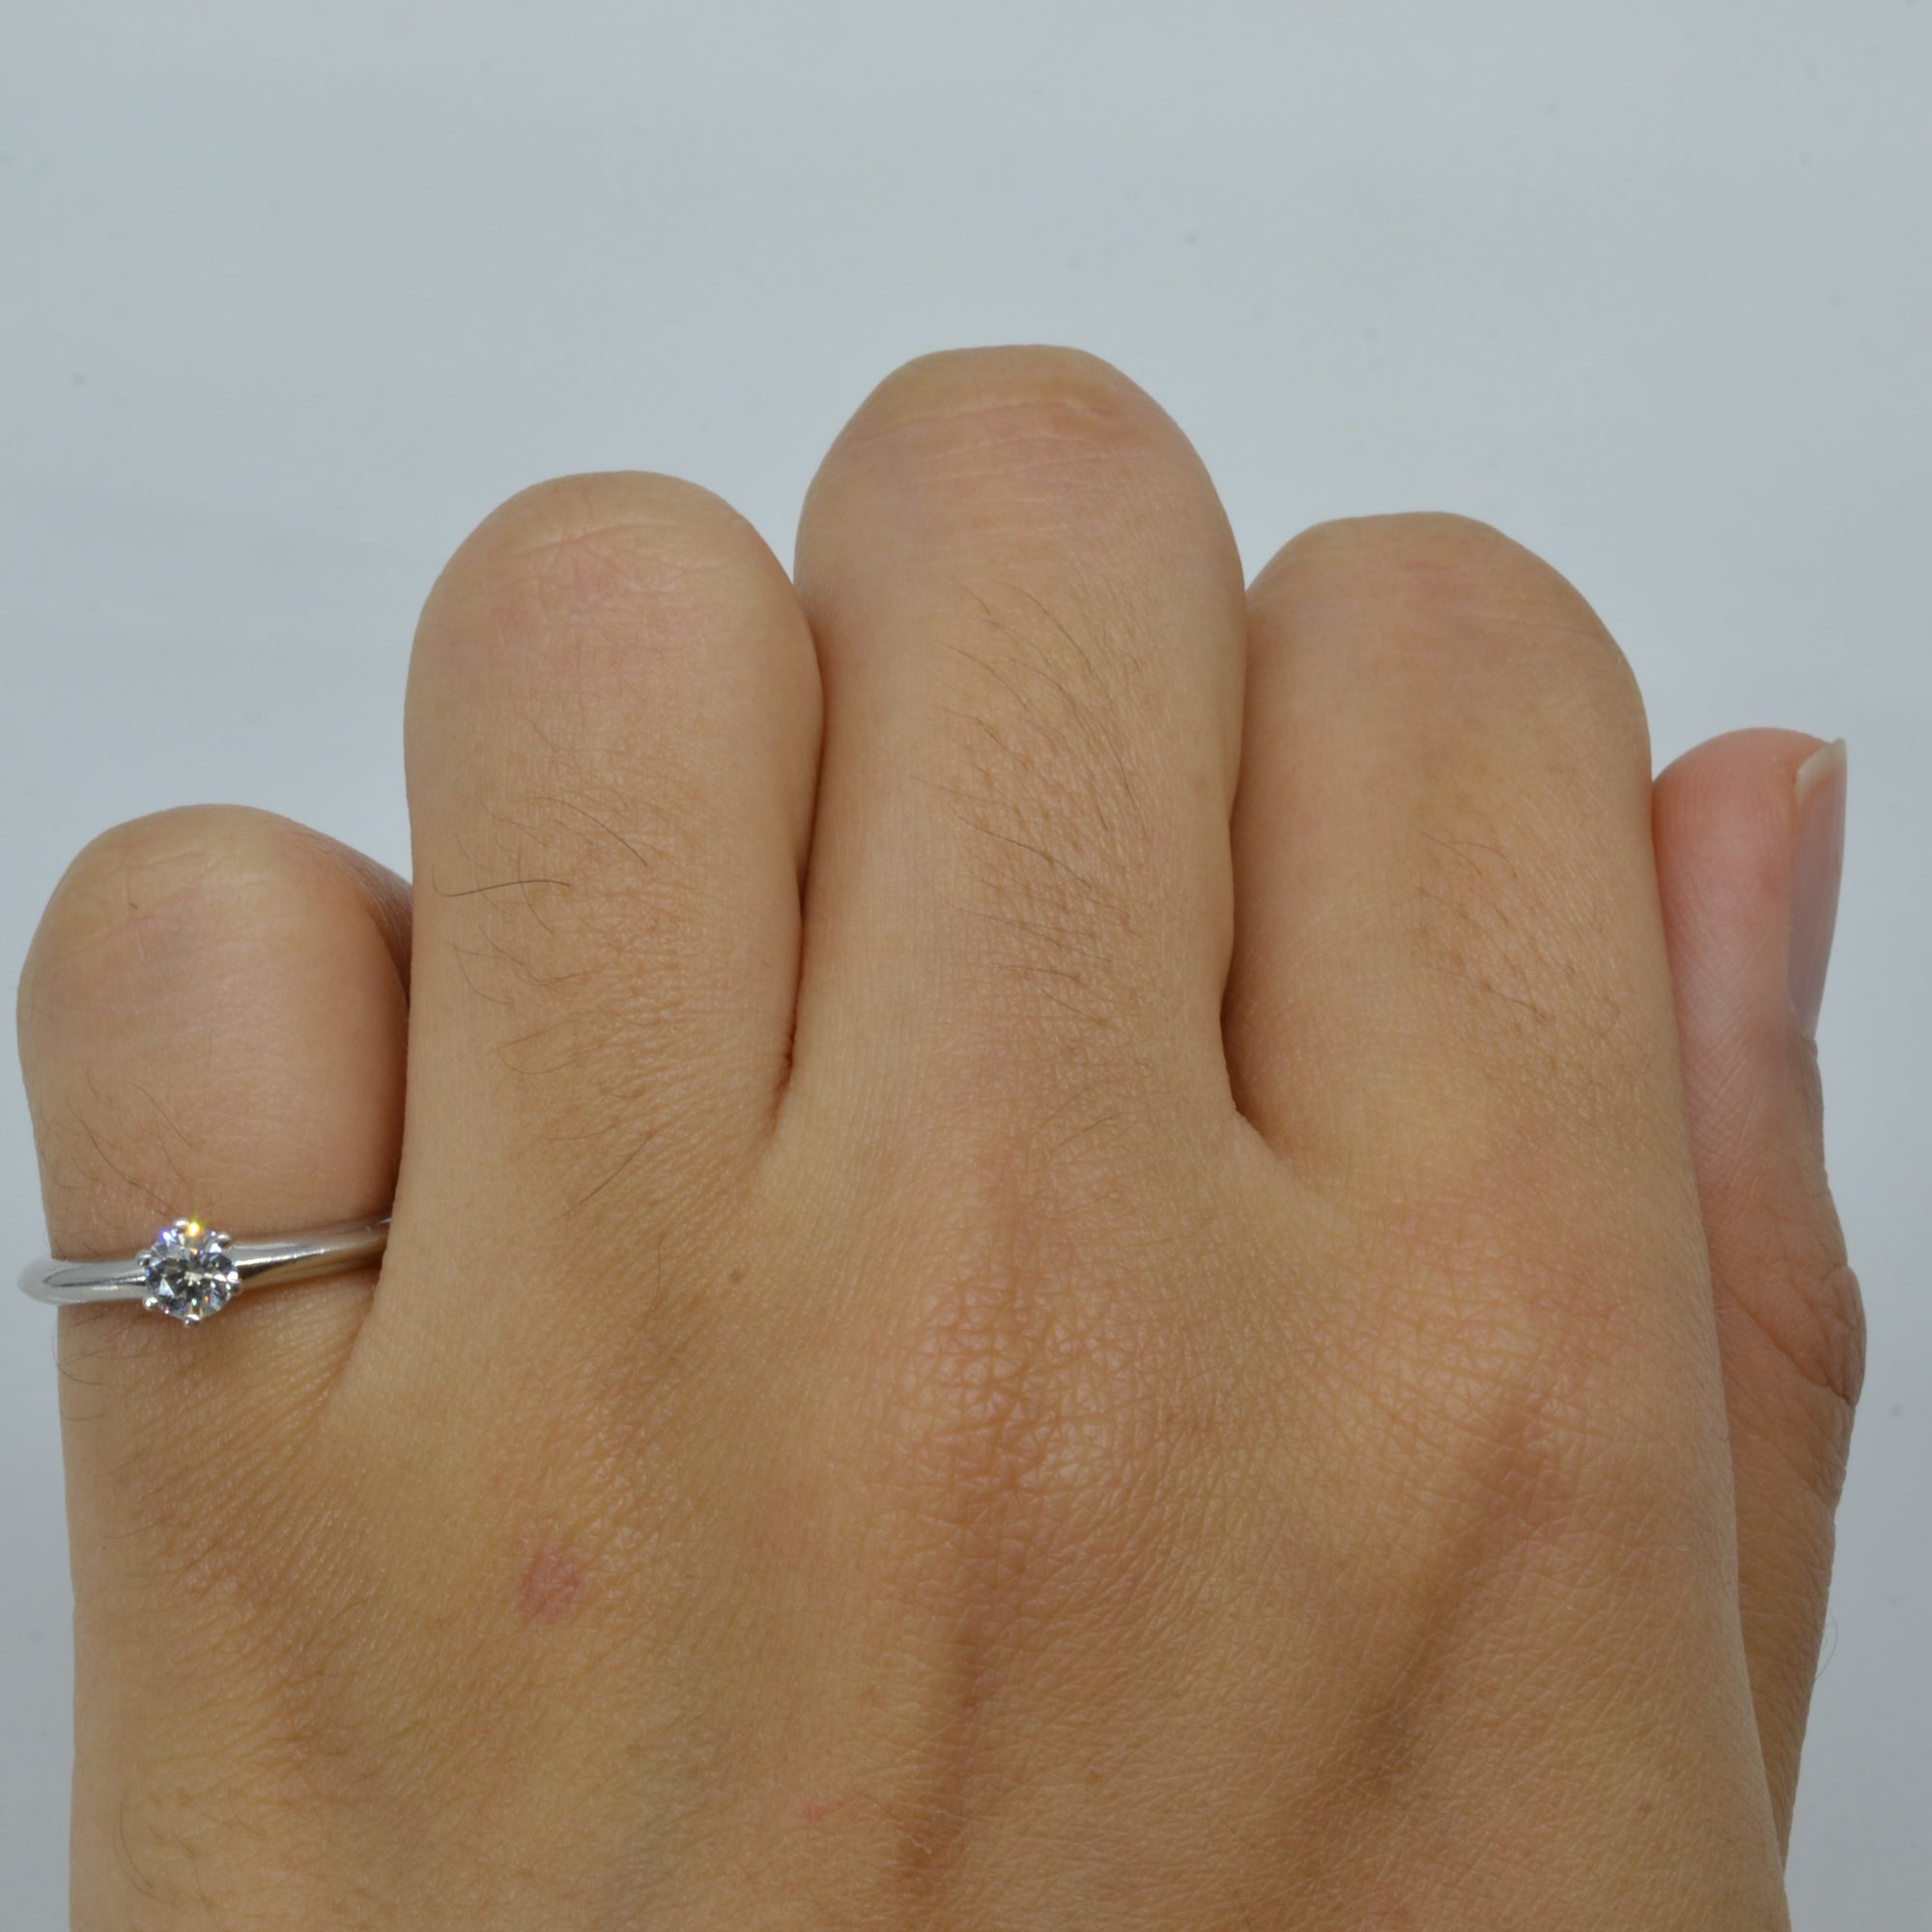 Tiffany & Co.' Solitaire Diamond Engagement Ring | 0.21ct | SZ 3.75 |